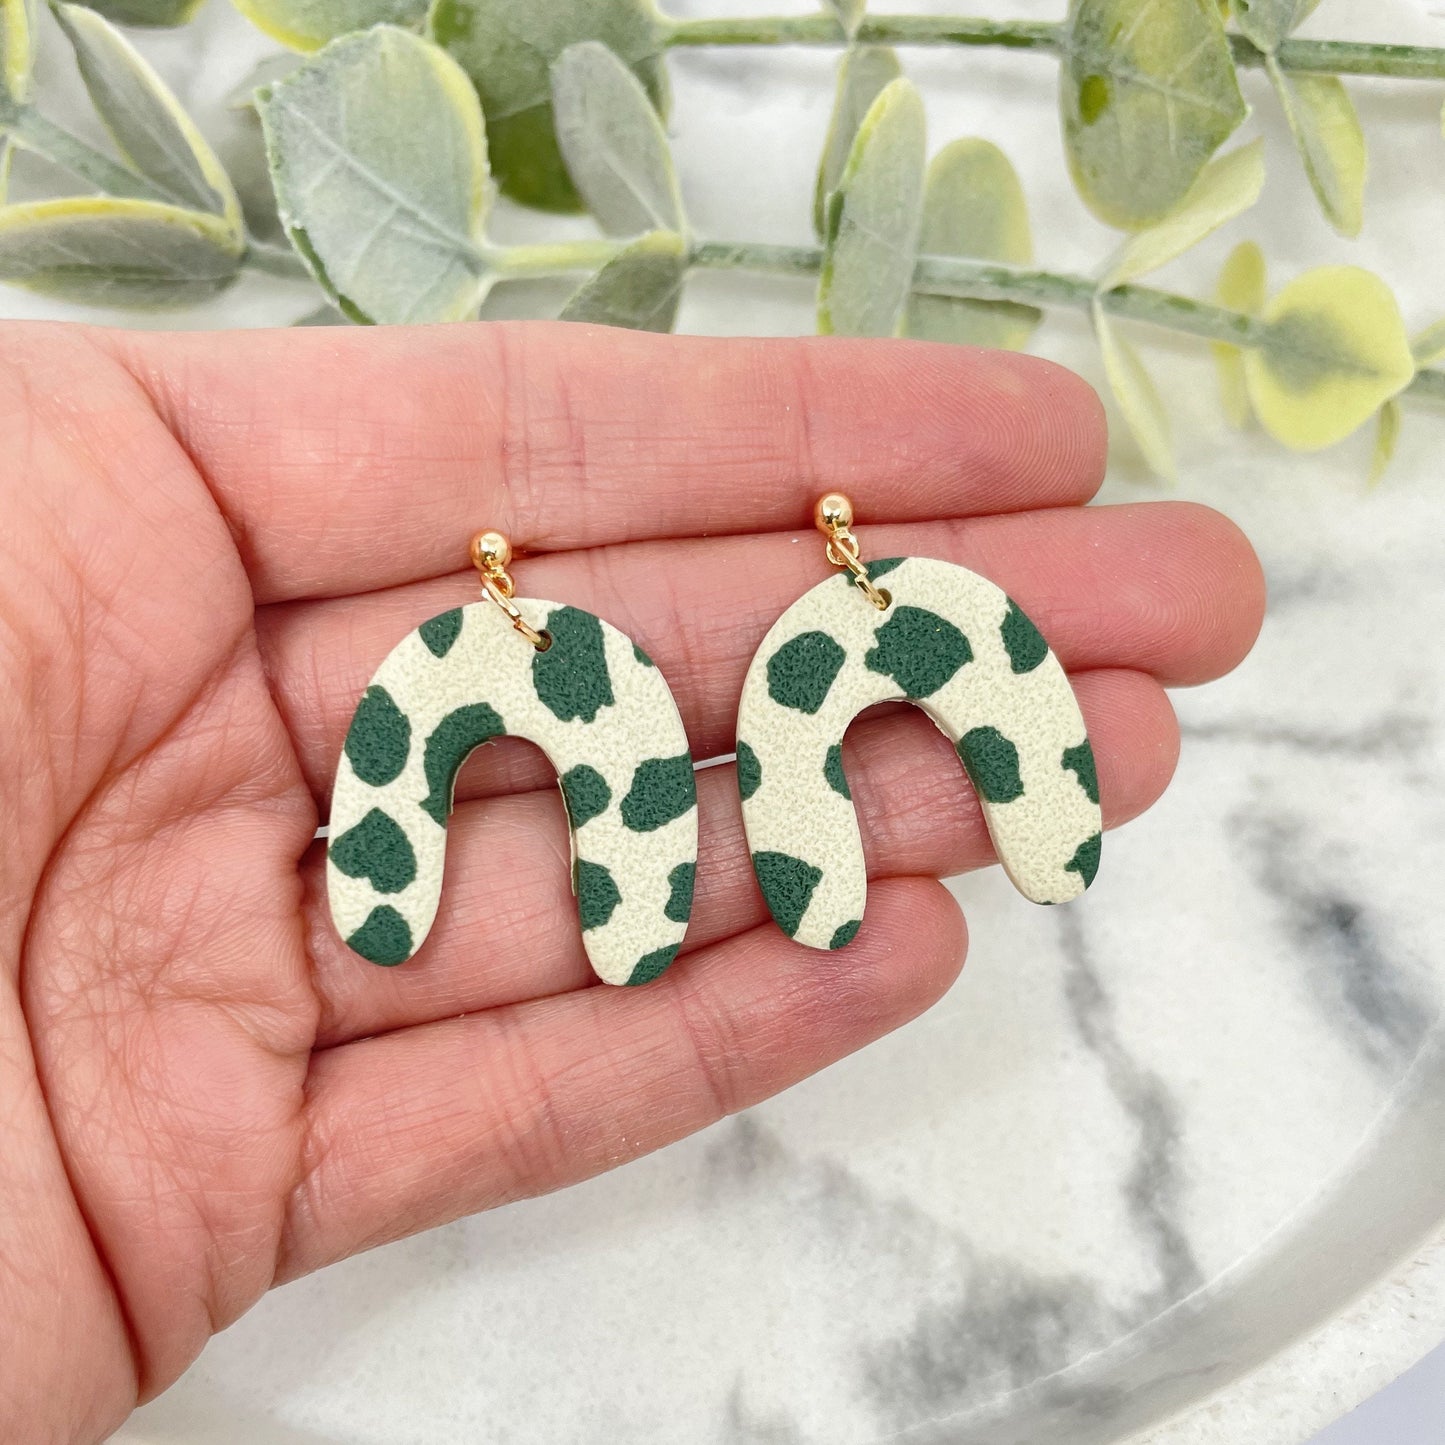 Green and white polymer clay dangle earrings, nickel free, post box gift, best friend birthday gift, girlfriend gift,